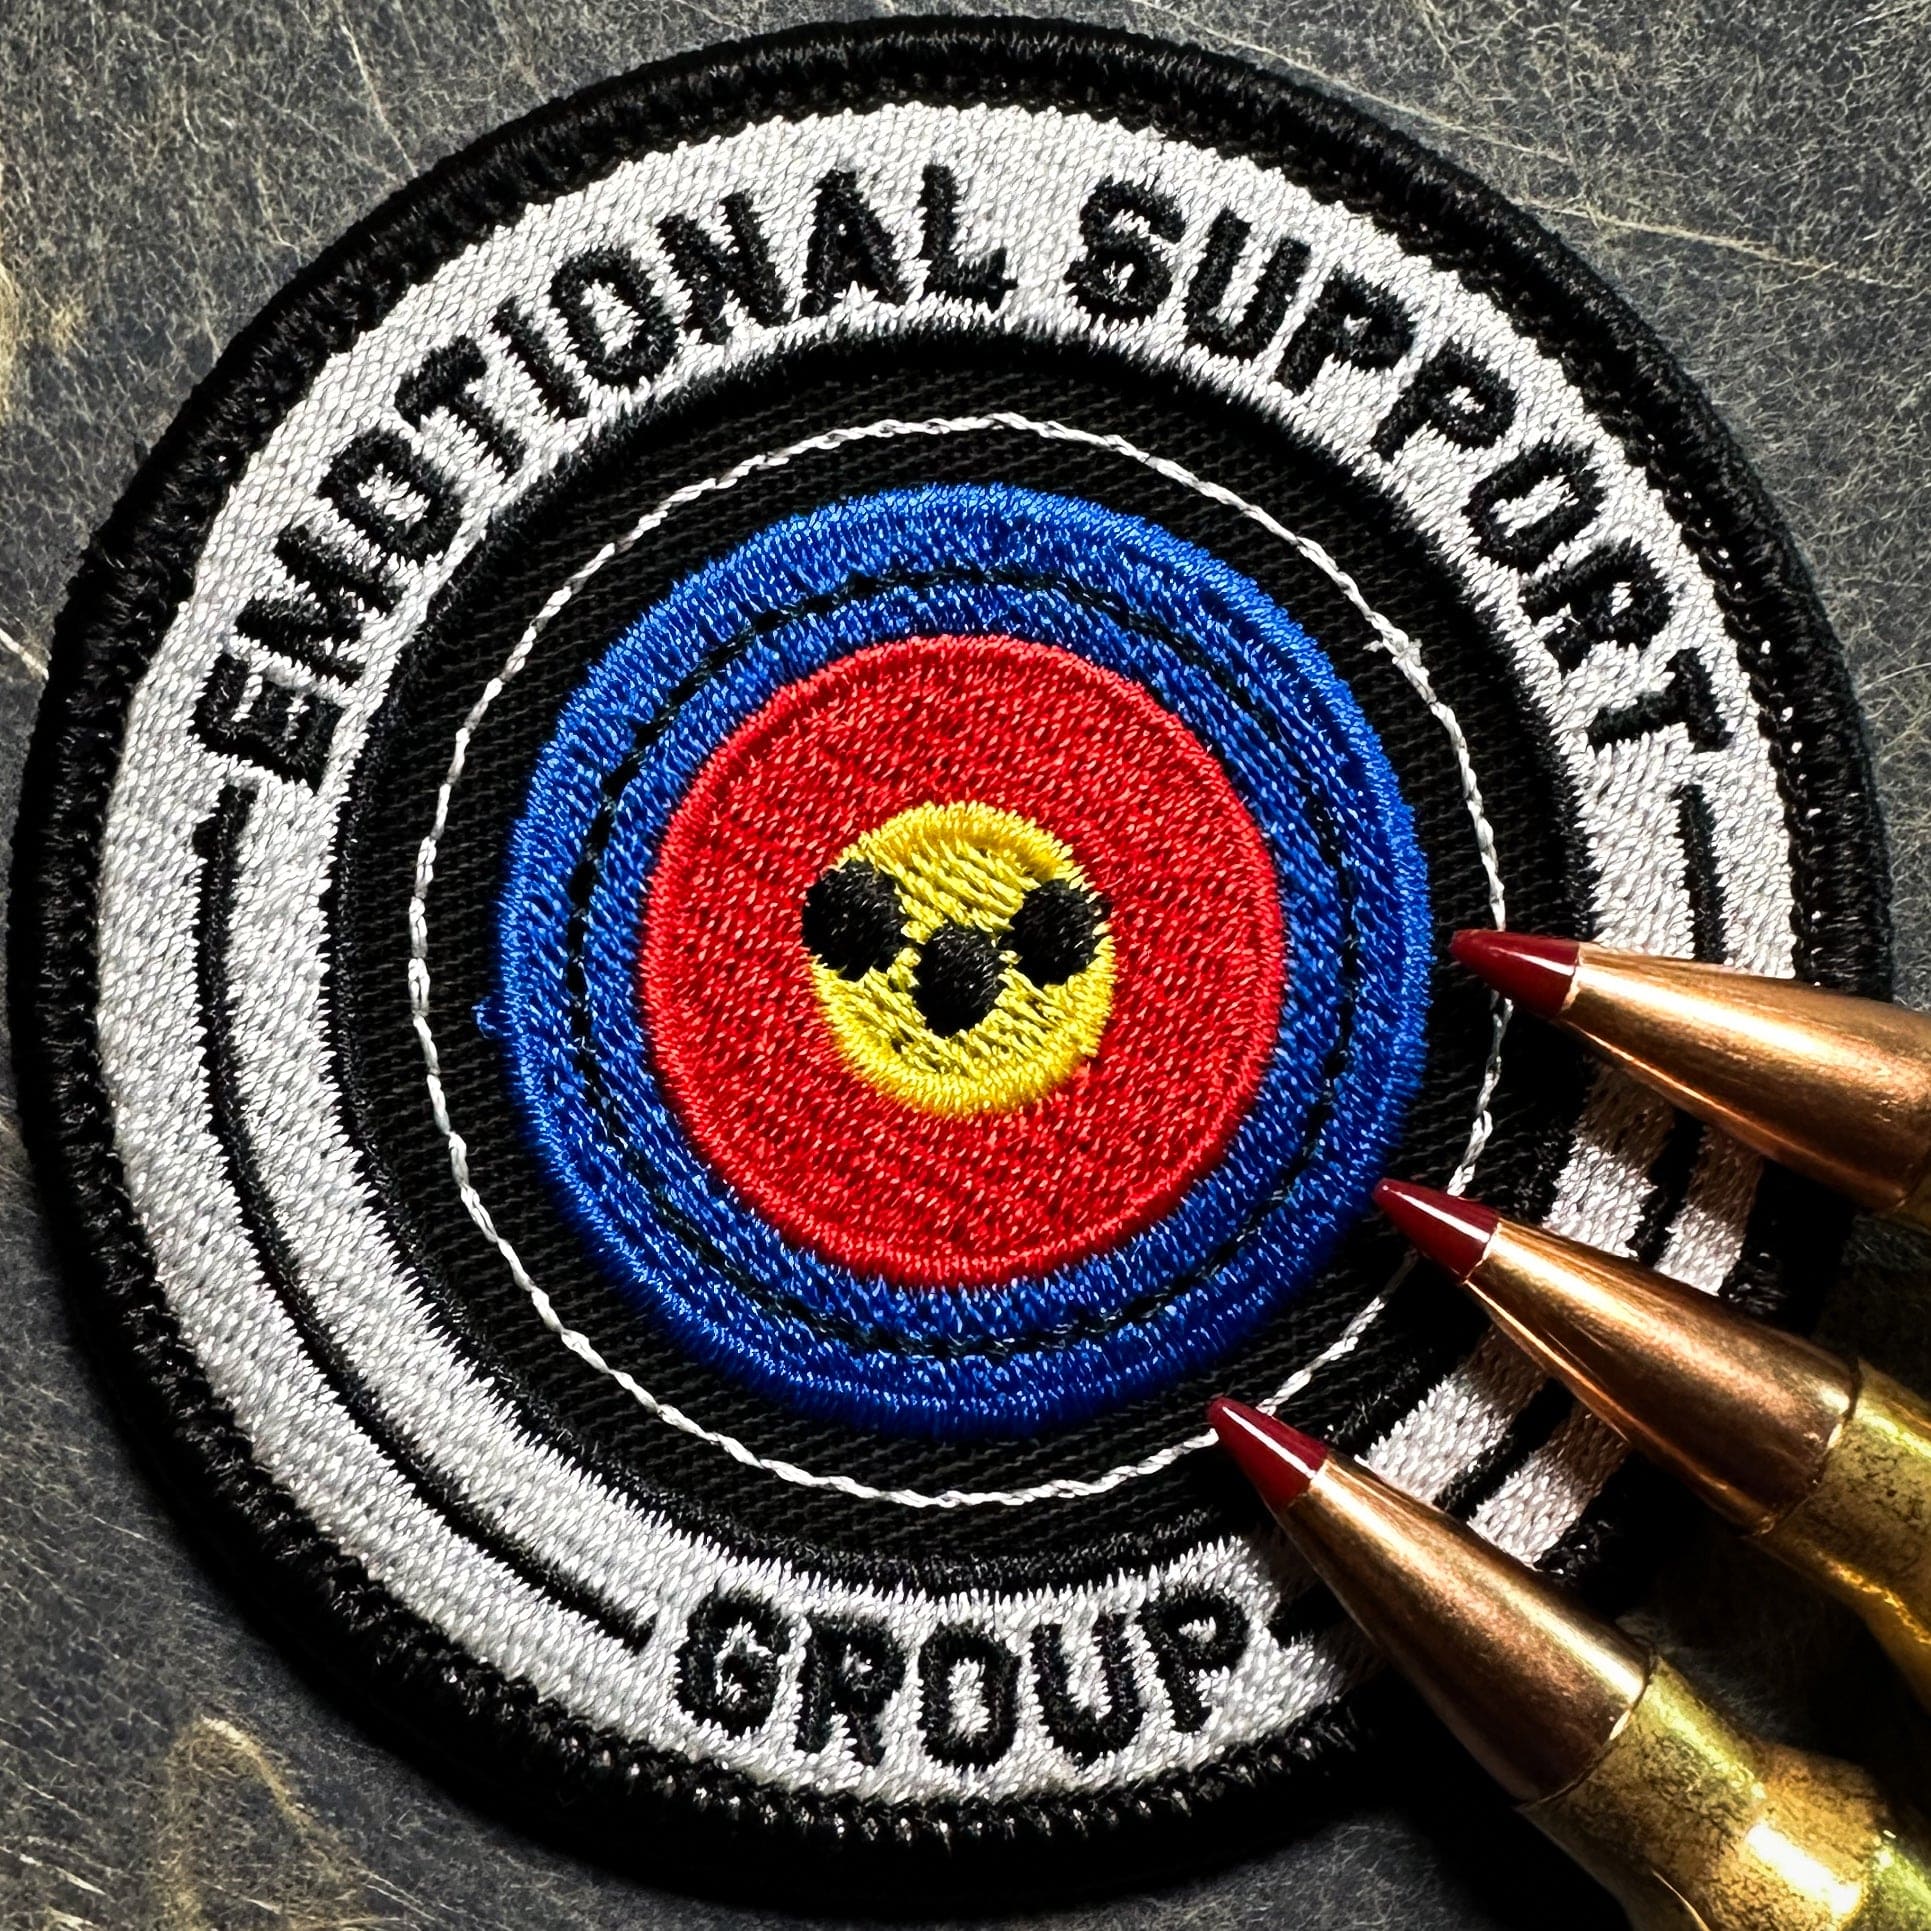 Tactical Gear Junkie Patches Emotional Support Group 2.0 - 3 Inch Round Embroidered Patch with Hook Fastener - Made in America